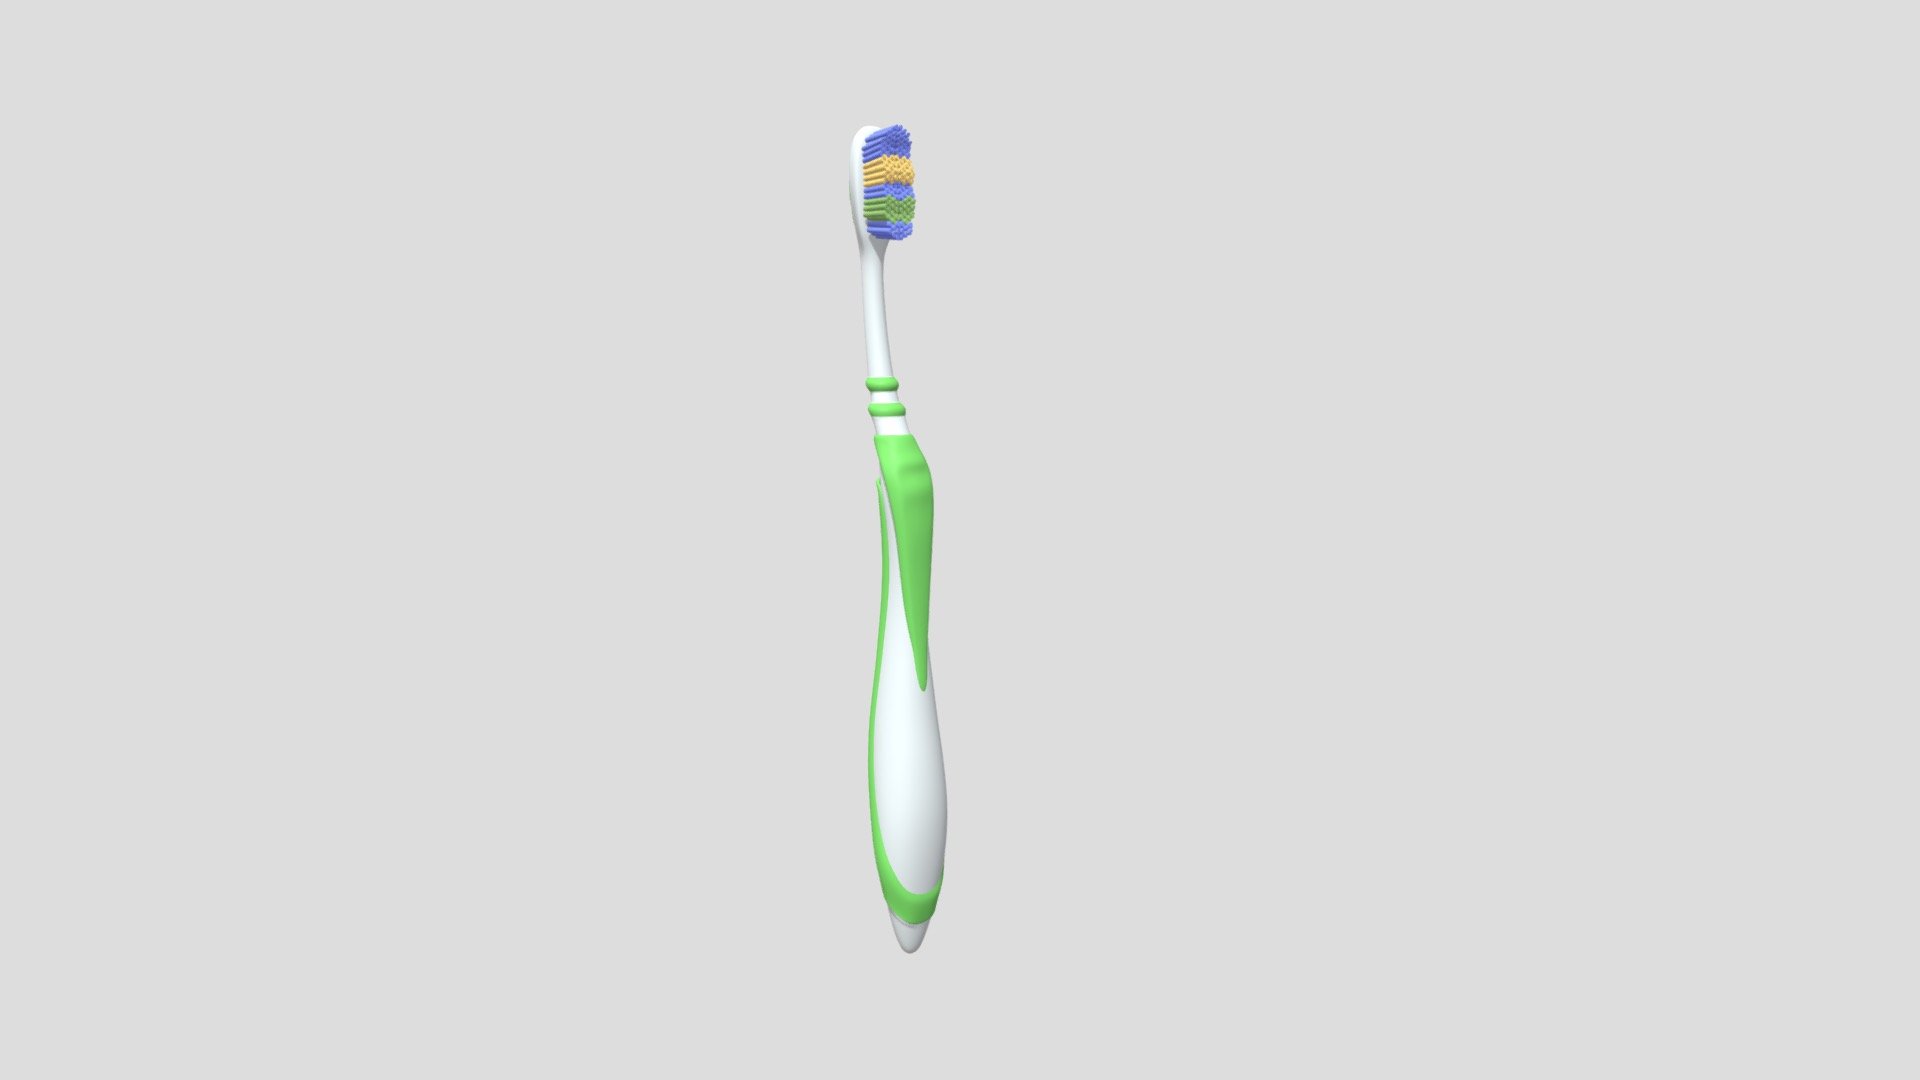 Subdivision Level: 2

Non-Mirrored.

Textures: 1024 x 1024, Multiple light colors on texture.

Materials: 1 - Toothbrush

Formats: .stl .obj .fbx .dae 

Origin located on Handle-center

Polygons: 84123

Vertices: 37412

I hope you enjoy the model! - Toothbrush - Buy Royalty Free 3D model by ED+ (@EDplus) 3d model